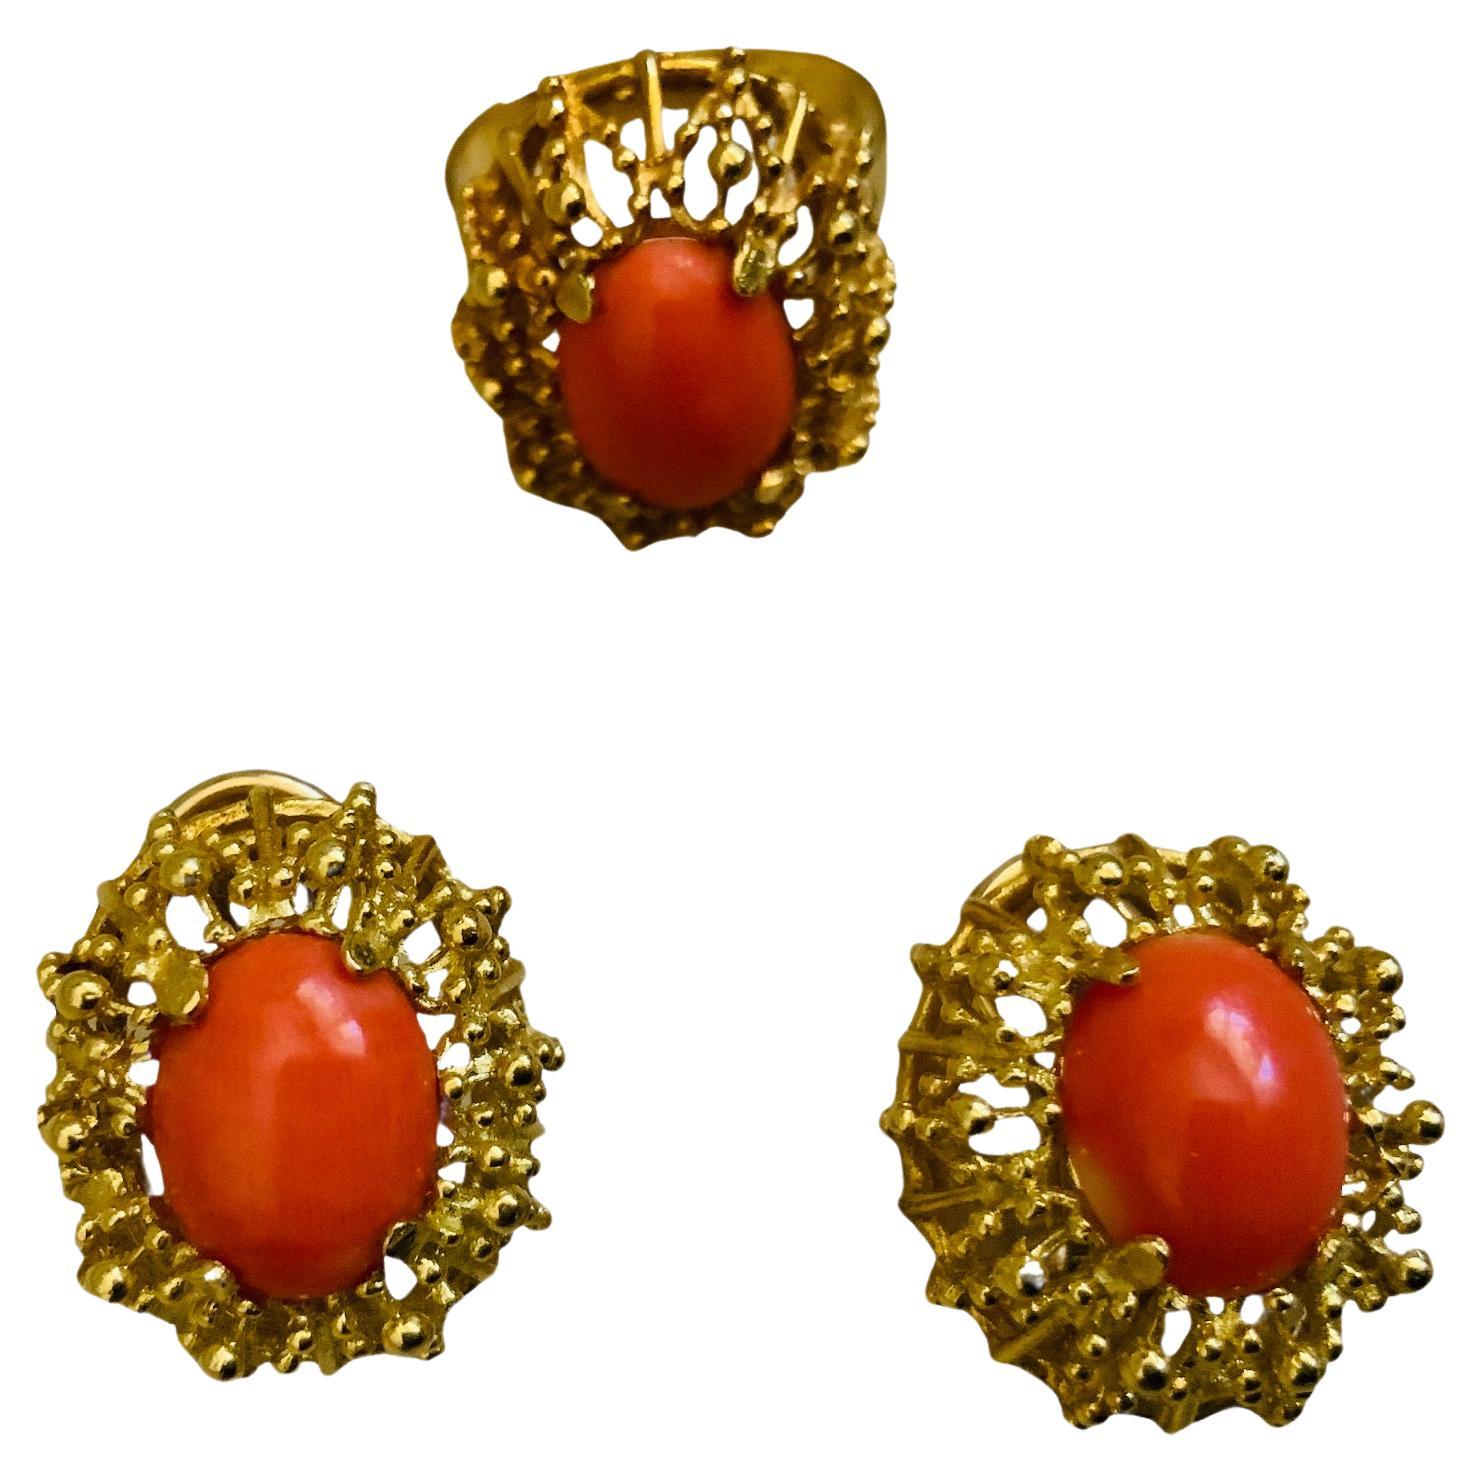 18K Set Of Corletto Coral Earrings And Cocktail Ring